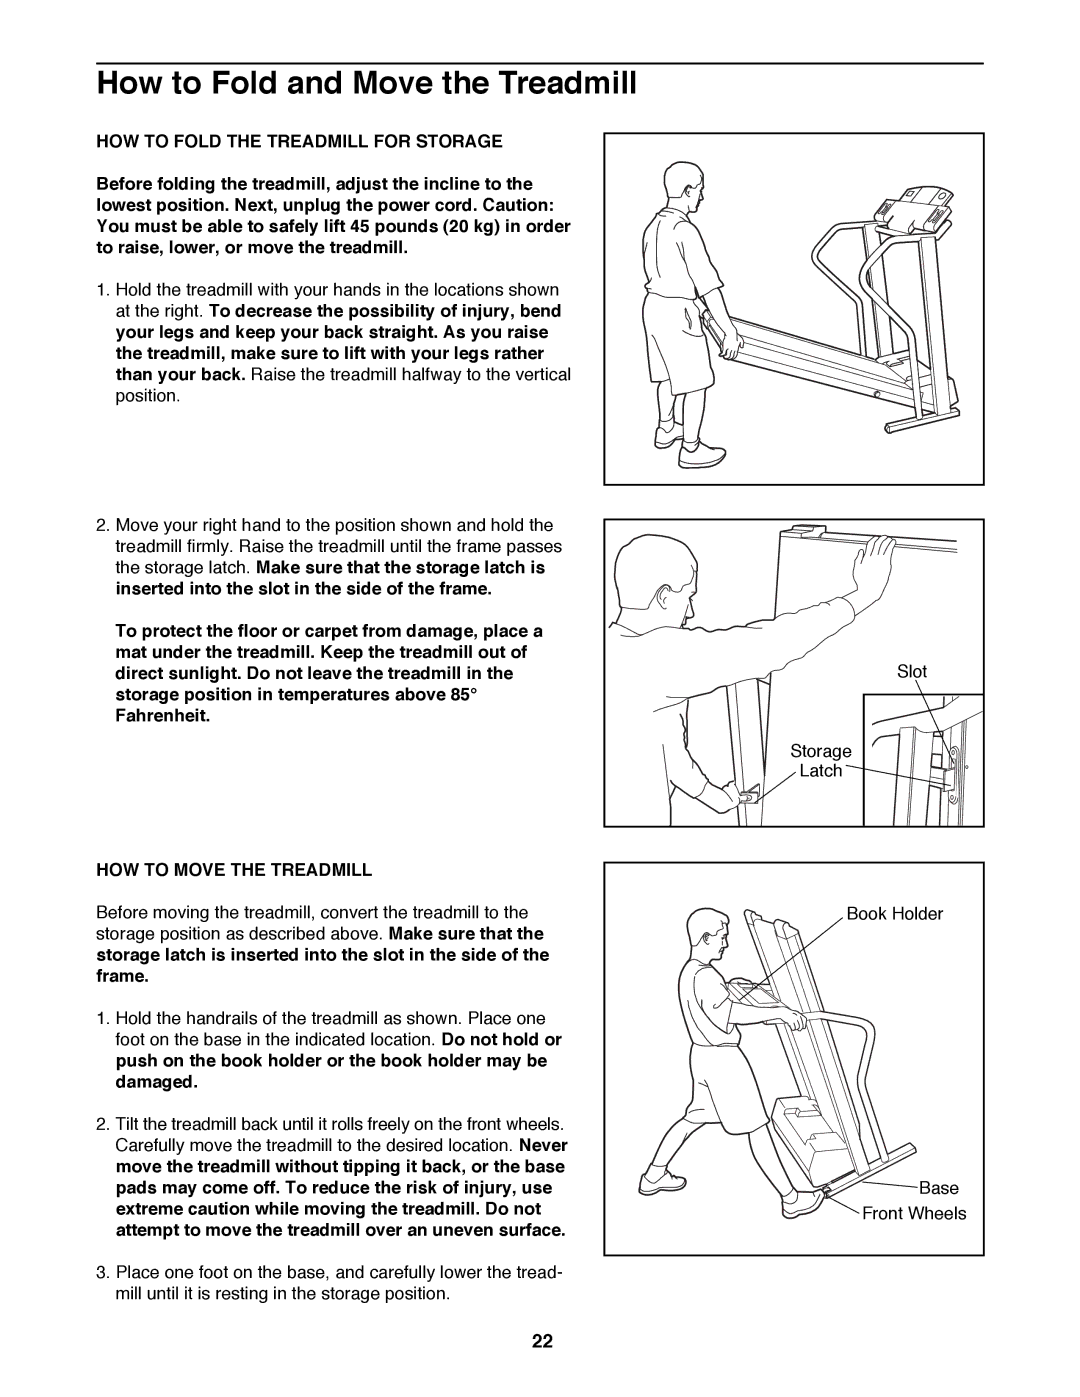 NordicTrack NTTL15083 How to Fold and Move the Treadmill, HOW to Fold the Treadmill for Storage, HOW to Move the Treadmill 